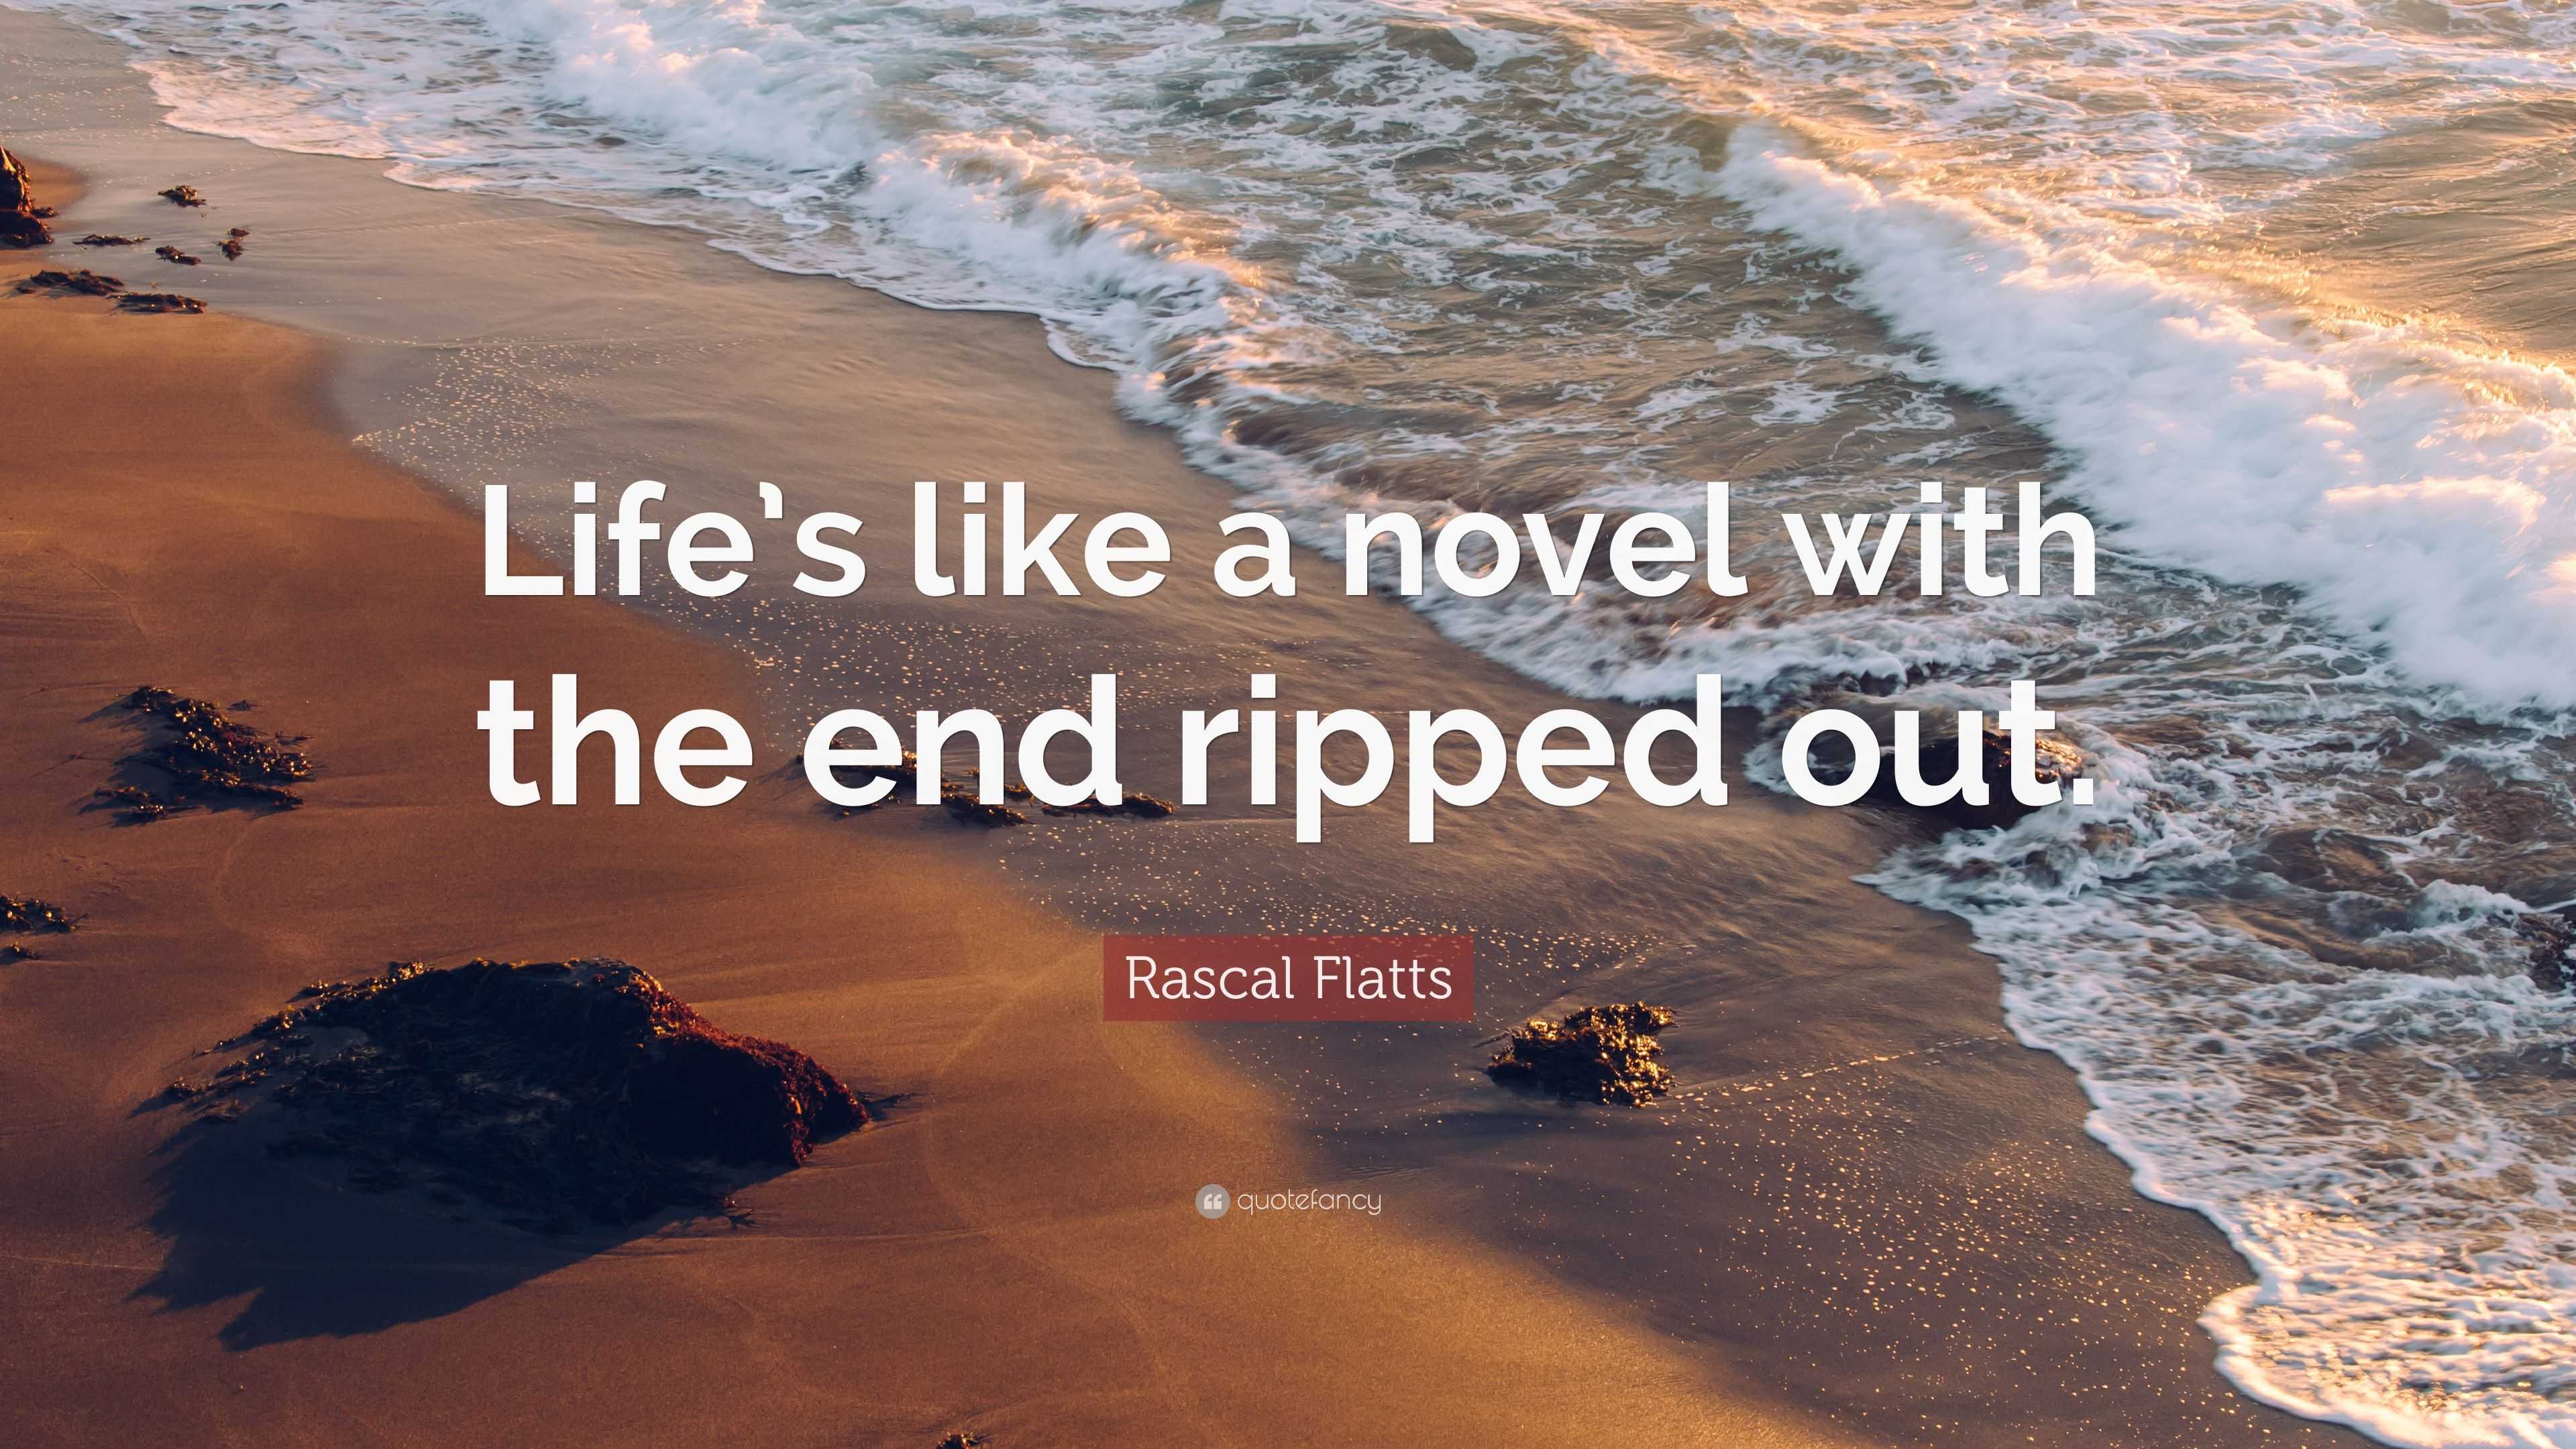 Rascal Flatts Quote Life S Like A Novel With The End Ripped Out 7 Wallpapers Quotefancy